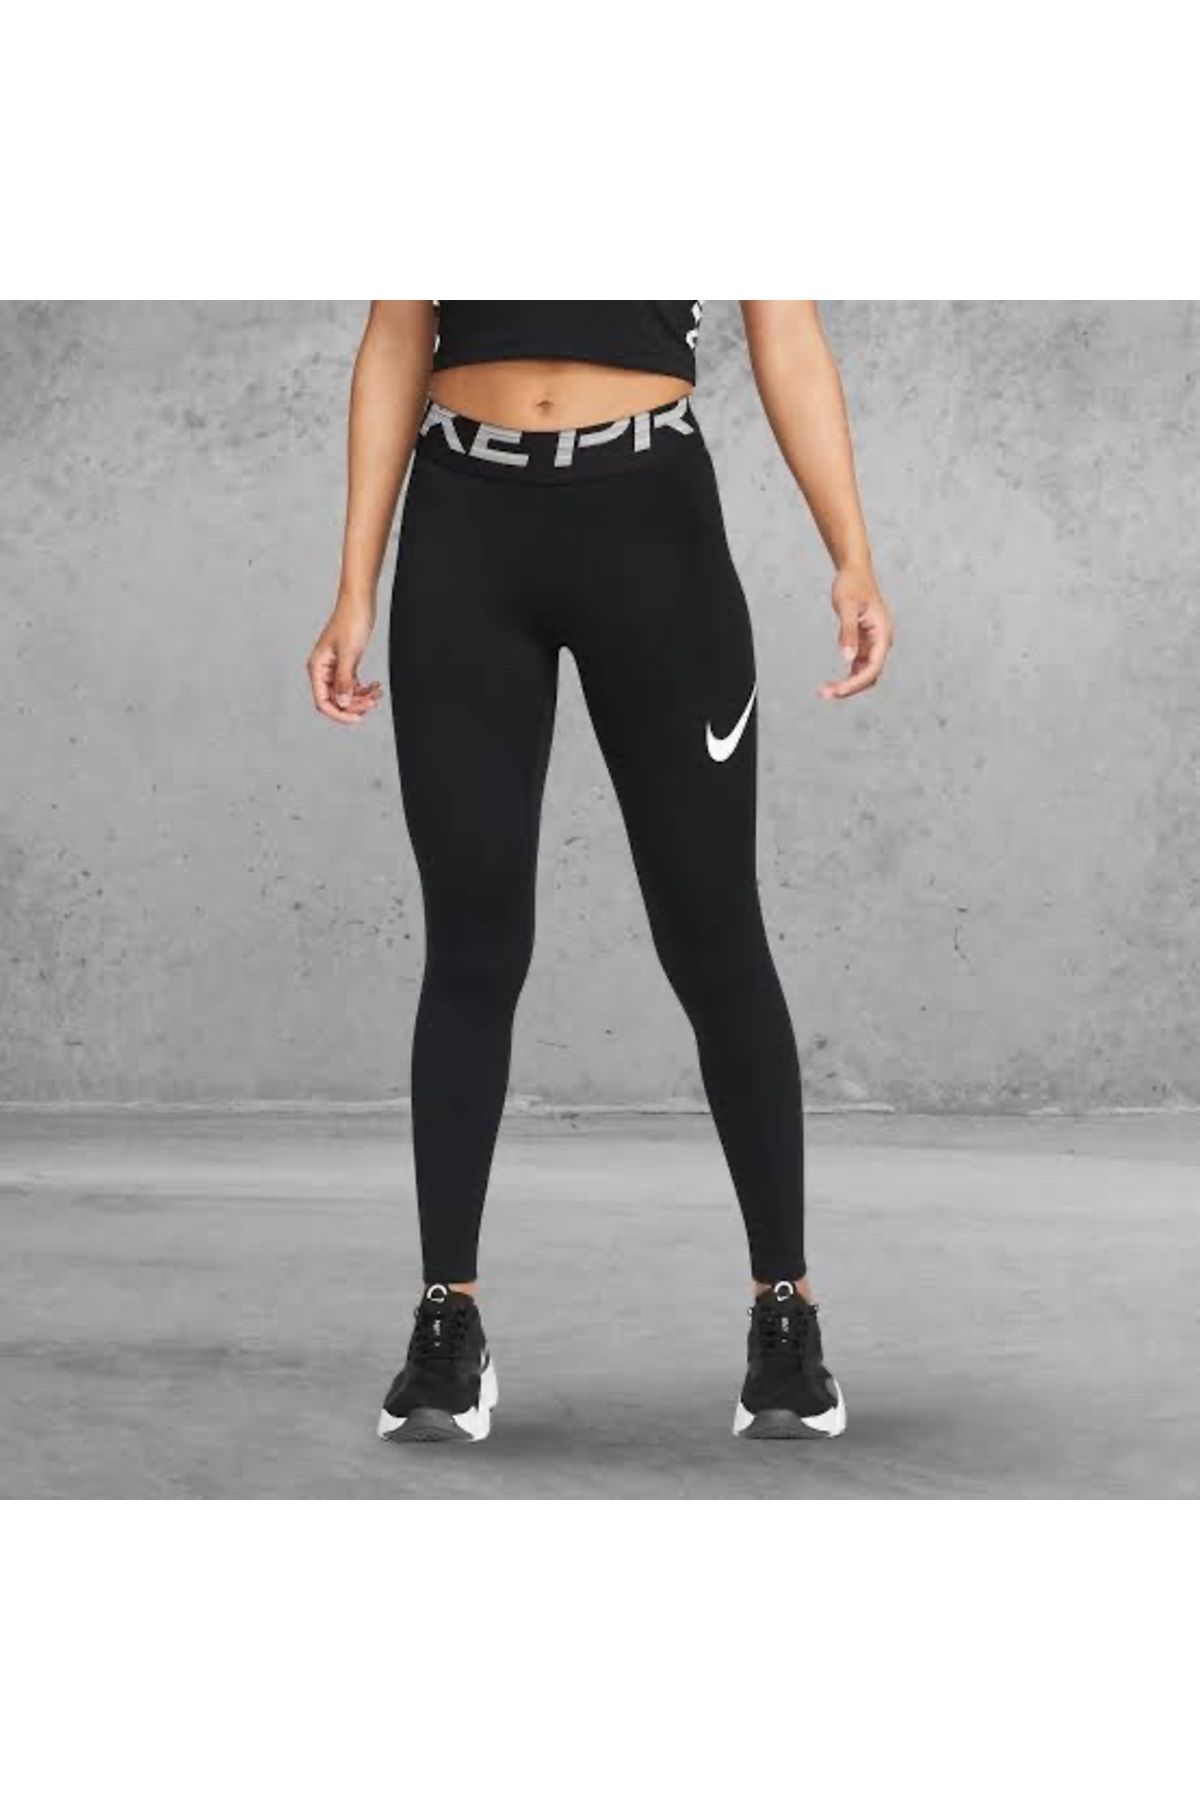 Nike Air High Waisted 7/8 Graphic Black Women's Tights - Trendyol